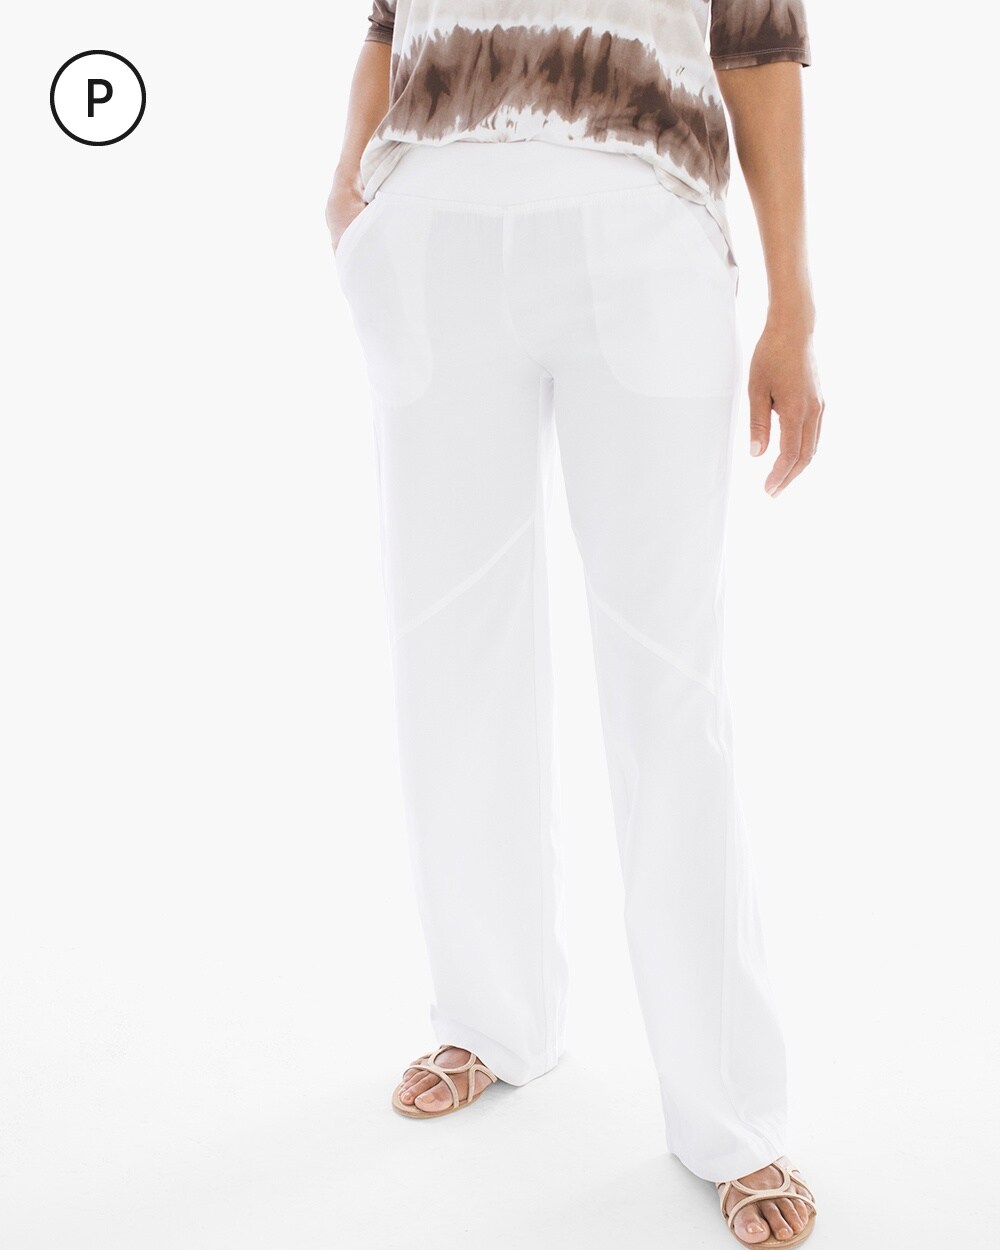 Zenergy Petite Peggy Relaxed Pants